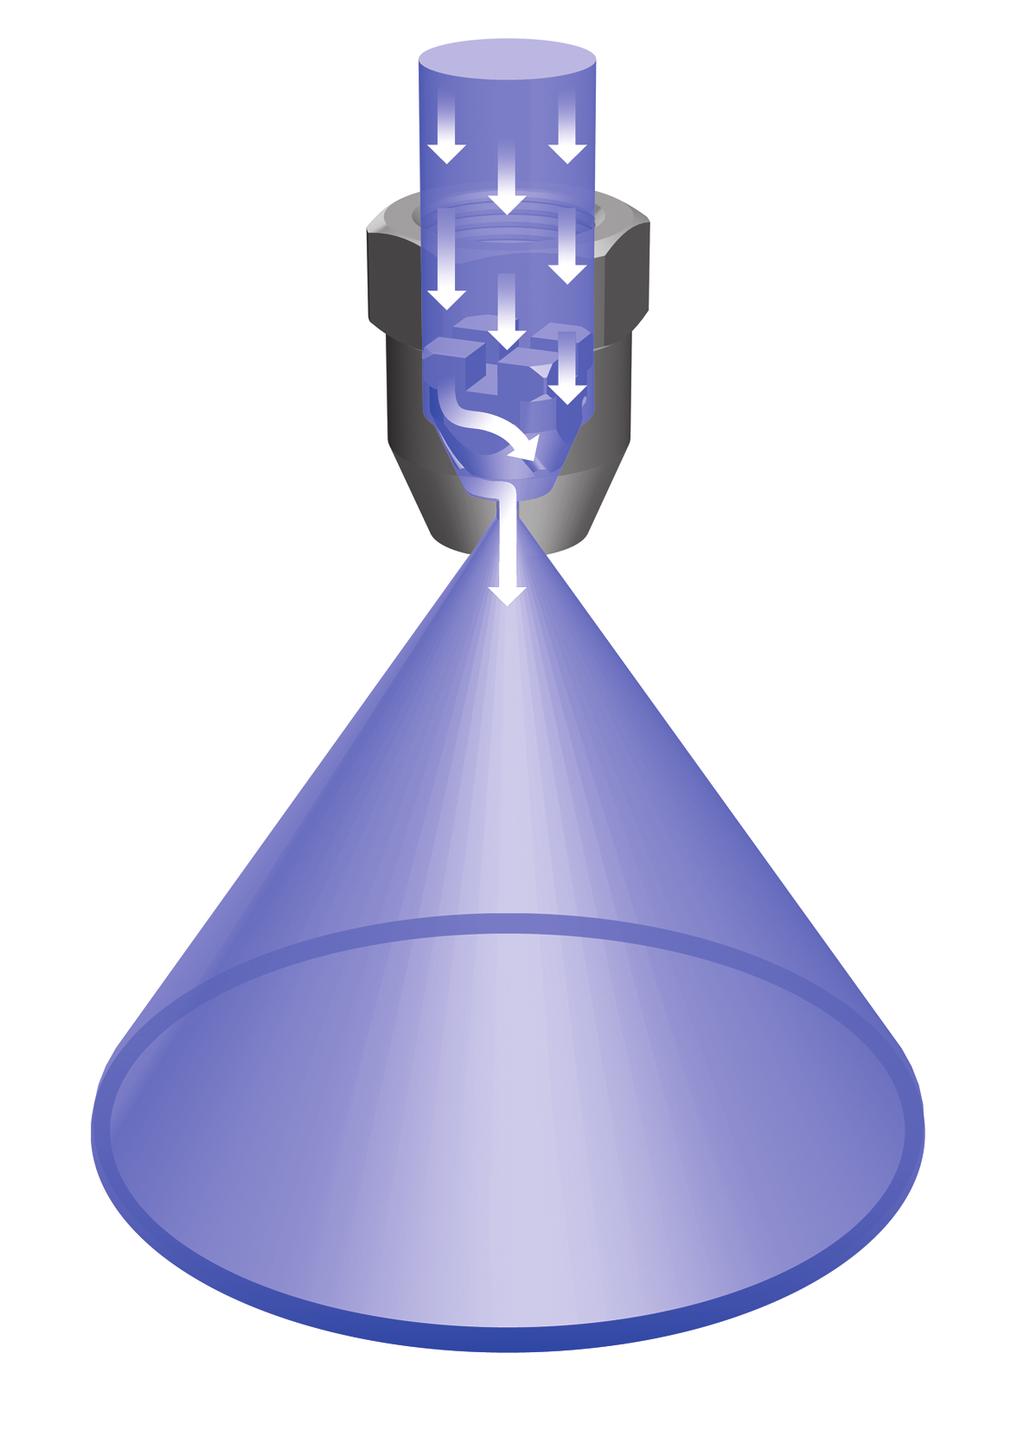 ollow cone Axial-flow hollow cone Finest drop particles Narrowest free crosssections Wherever a fine, uniform hollow cone spray is needed, e.g.